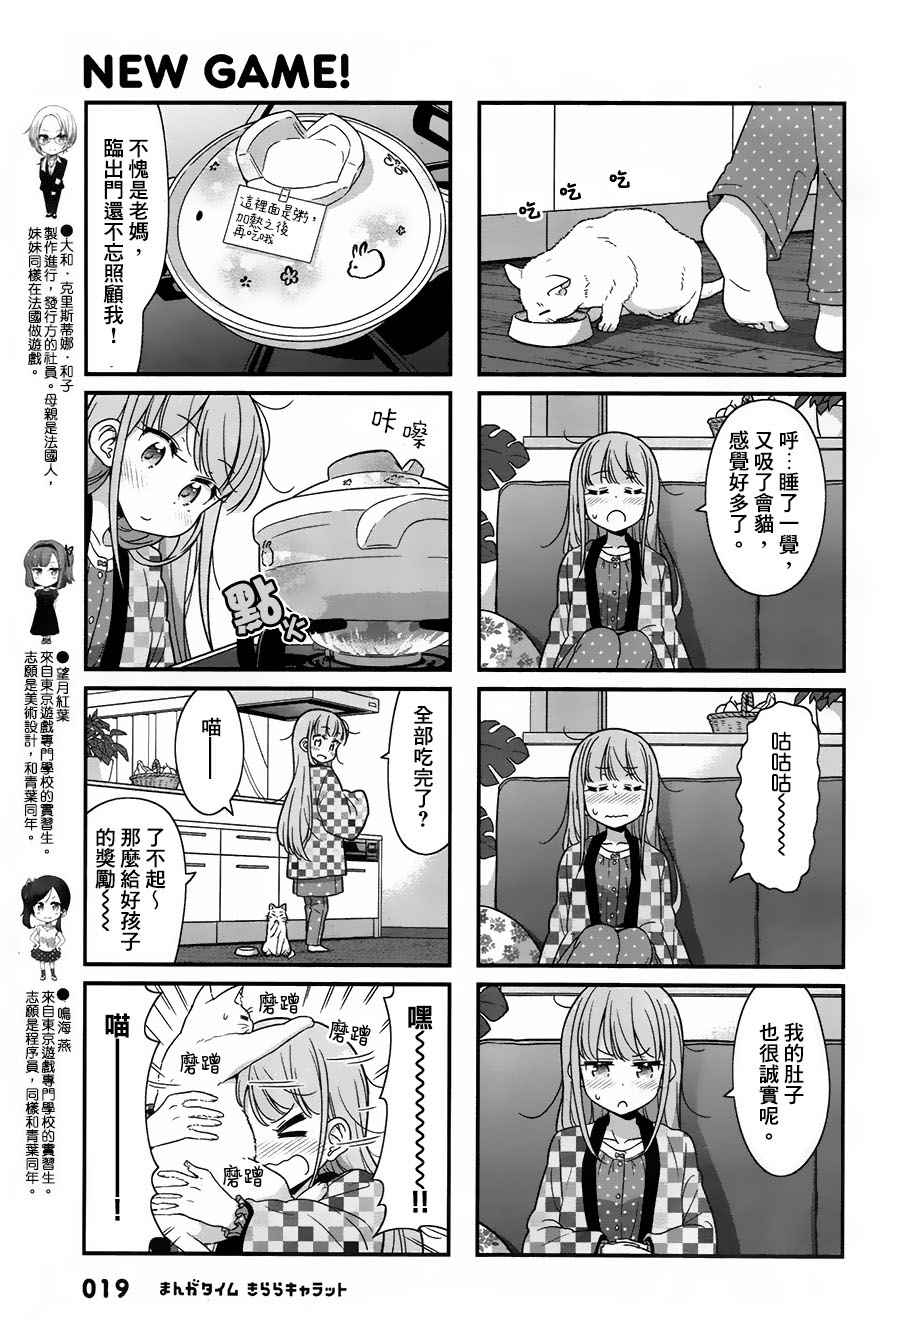 NEW GAME! - 73 第73話 - 1